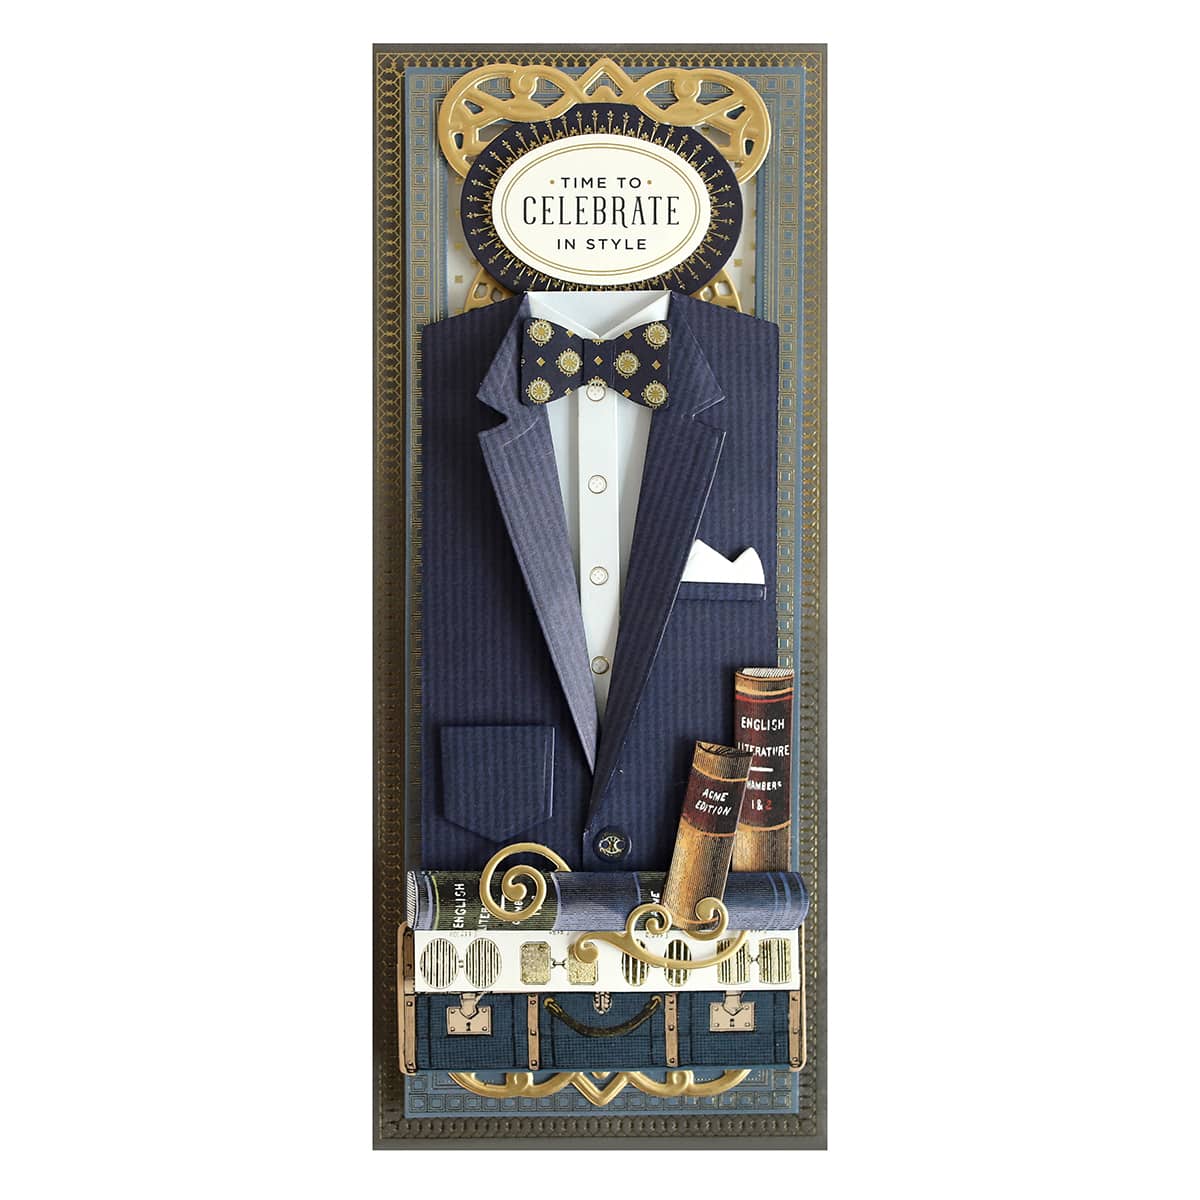 a card with a picture of a man in a tuxedo.